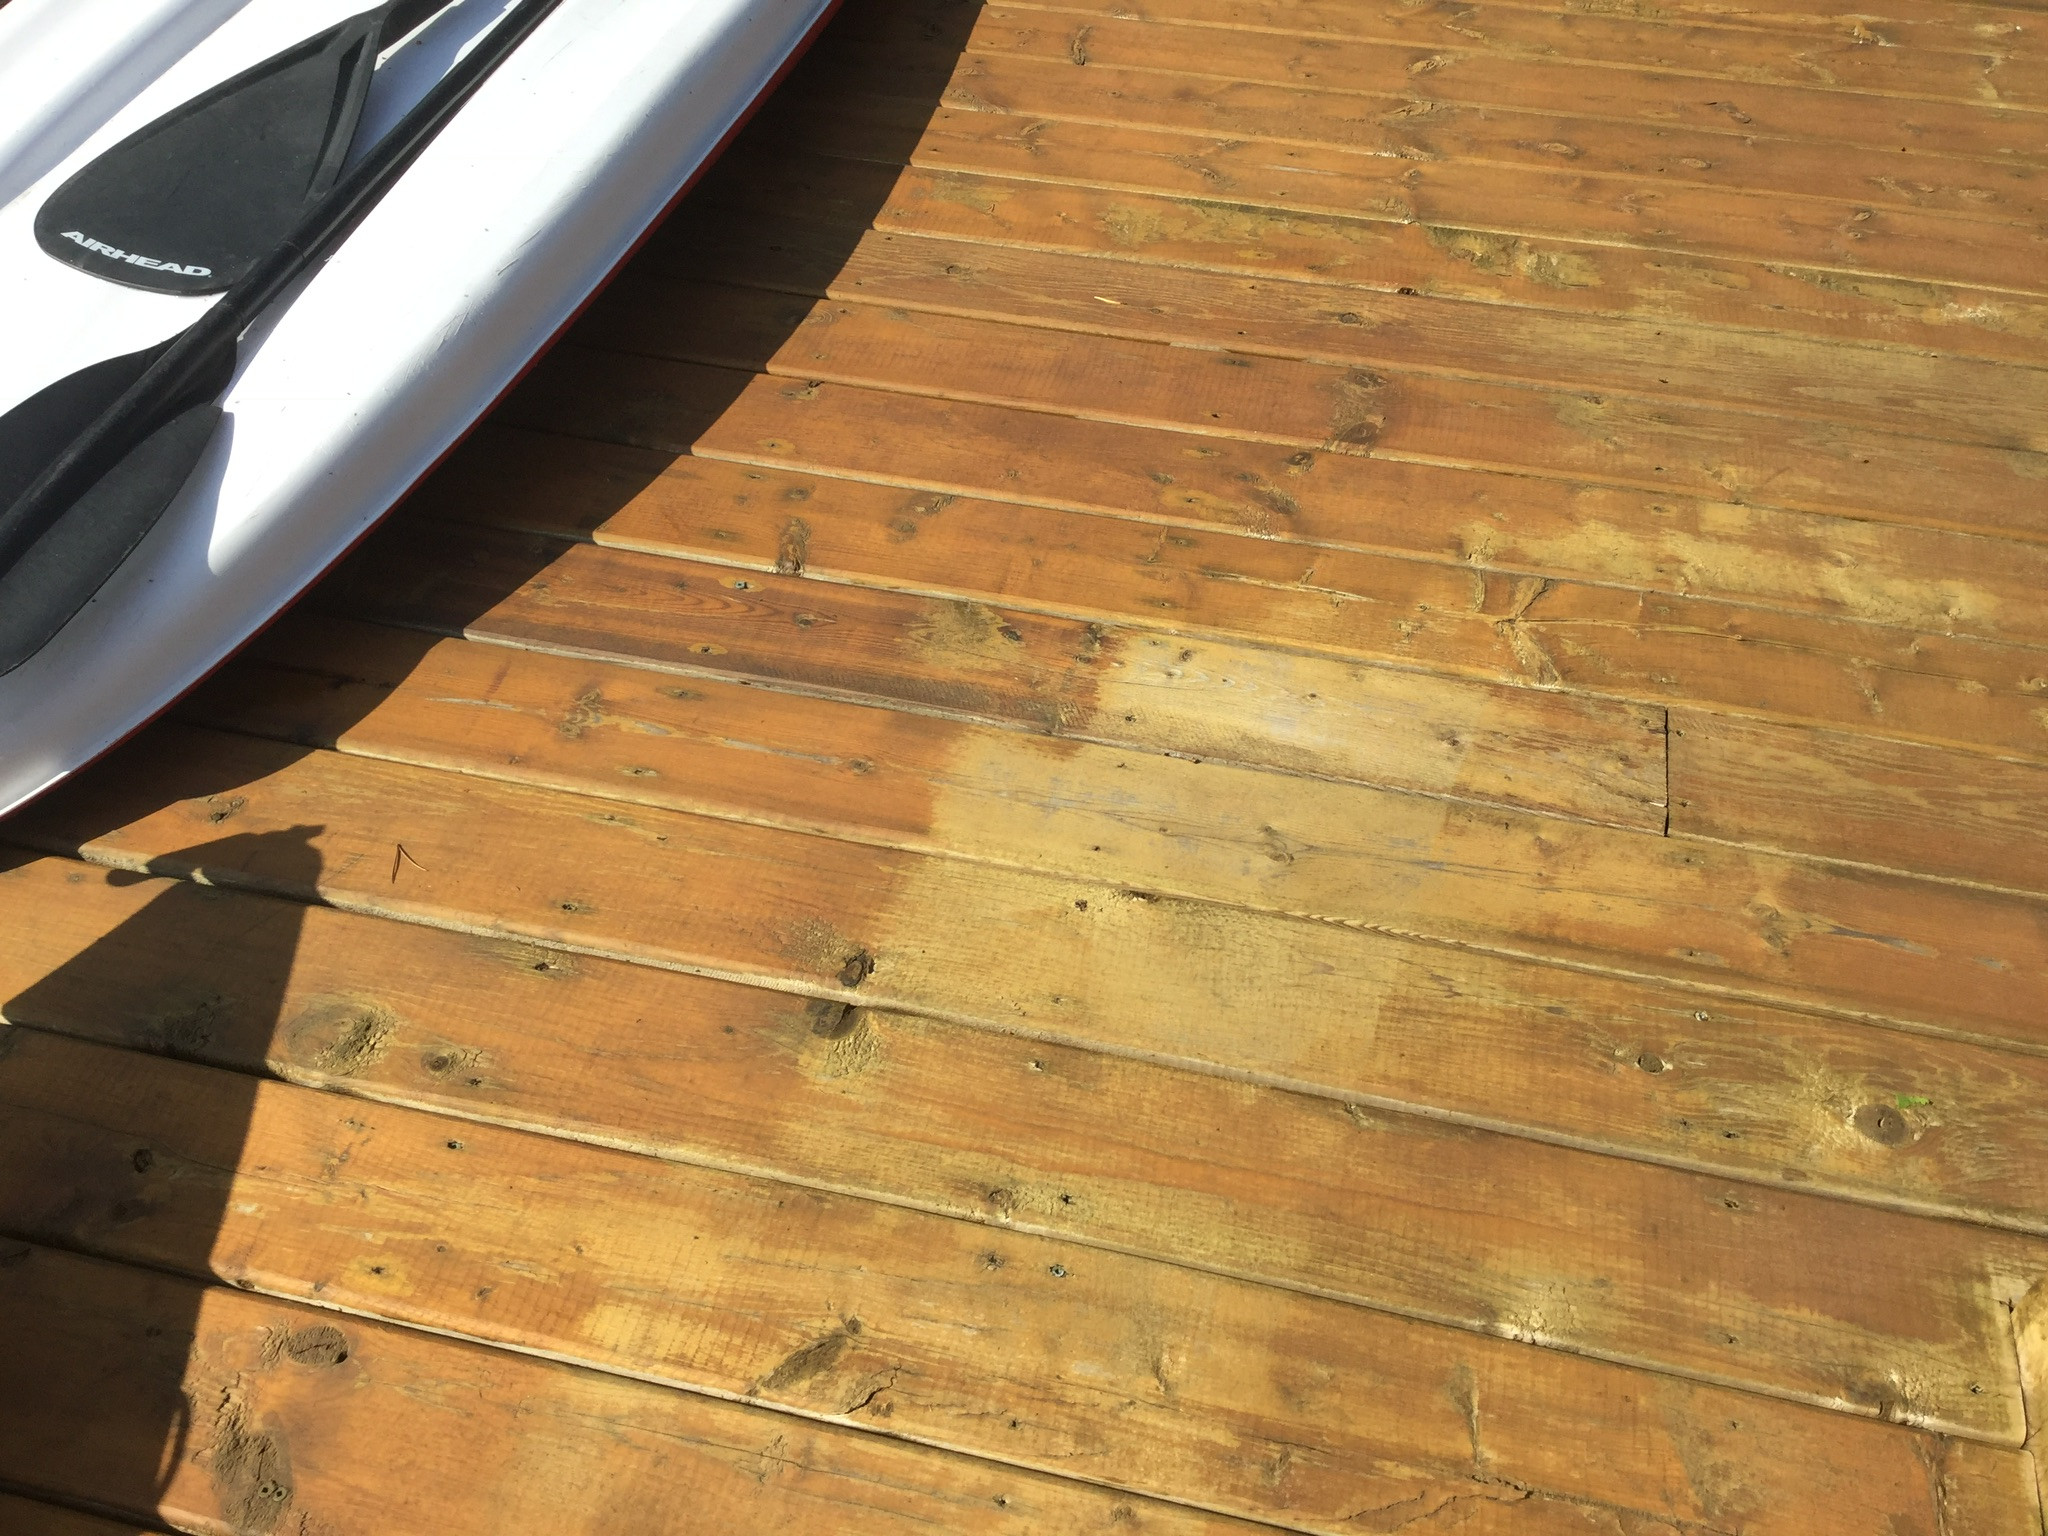 17 Lovable Hardwood Floor Stain Not Drying 2022 free download hardwood floor stain not drying of deck stripping removing an old deck stain best deck stain within 20480c22 ce3a 4e92 9579 ae22e2150447